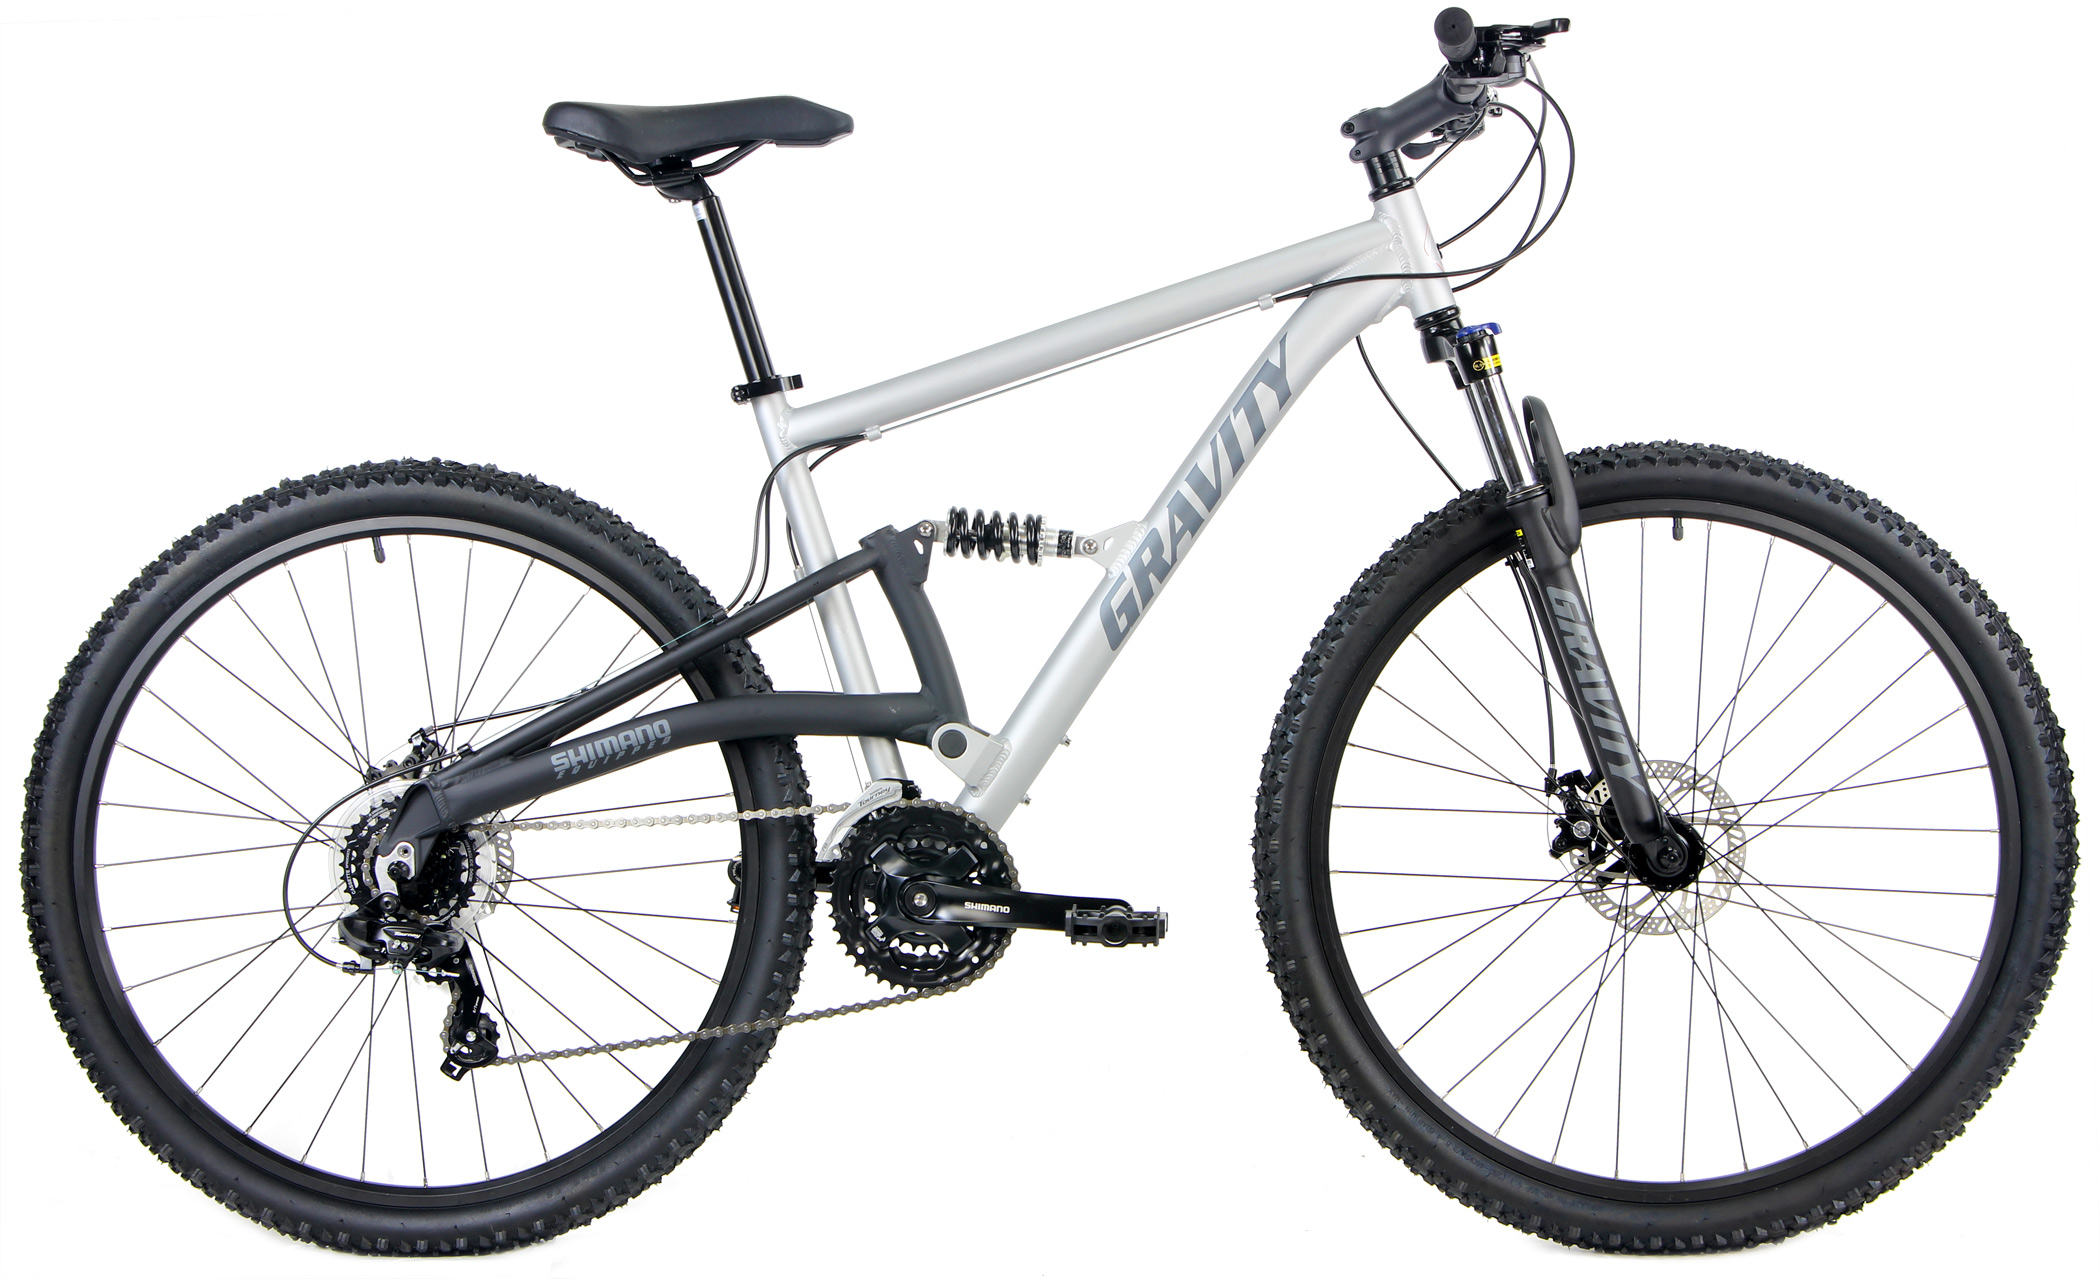 Save up to 60% off new 29er Mountain Bikes - MTB - Gravity Shimano Full